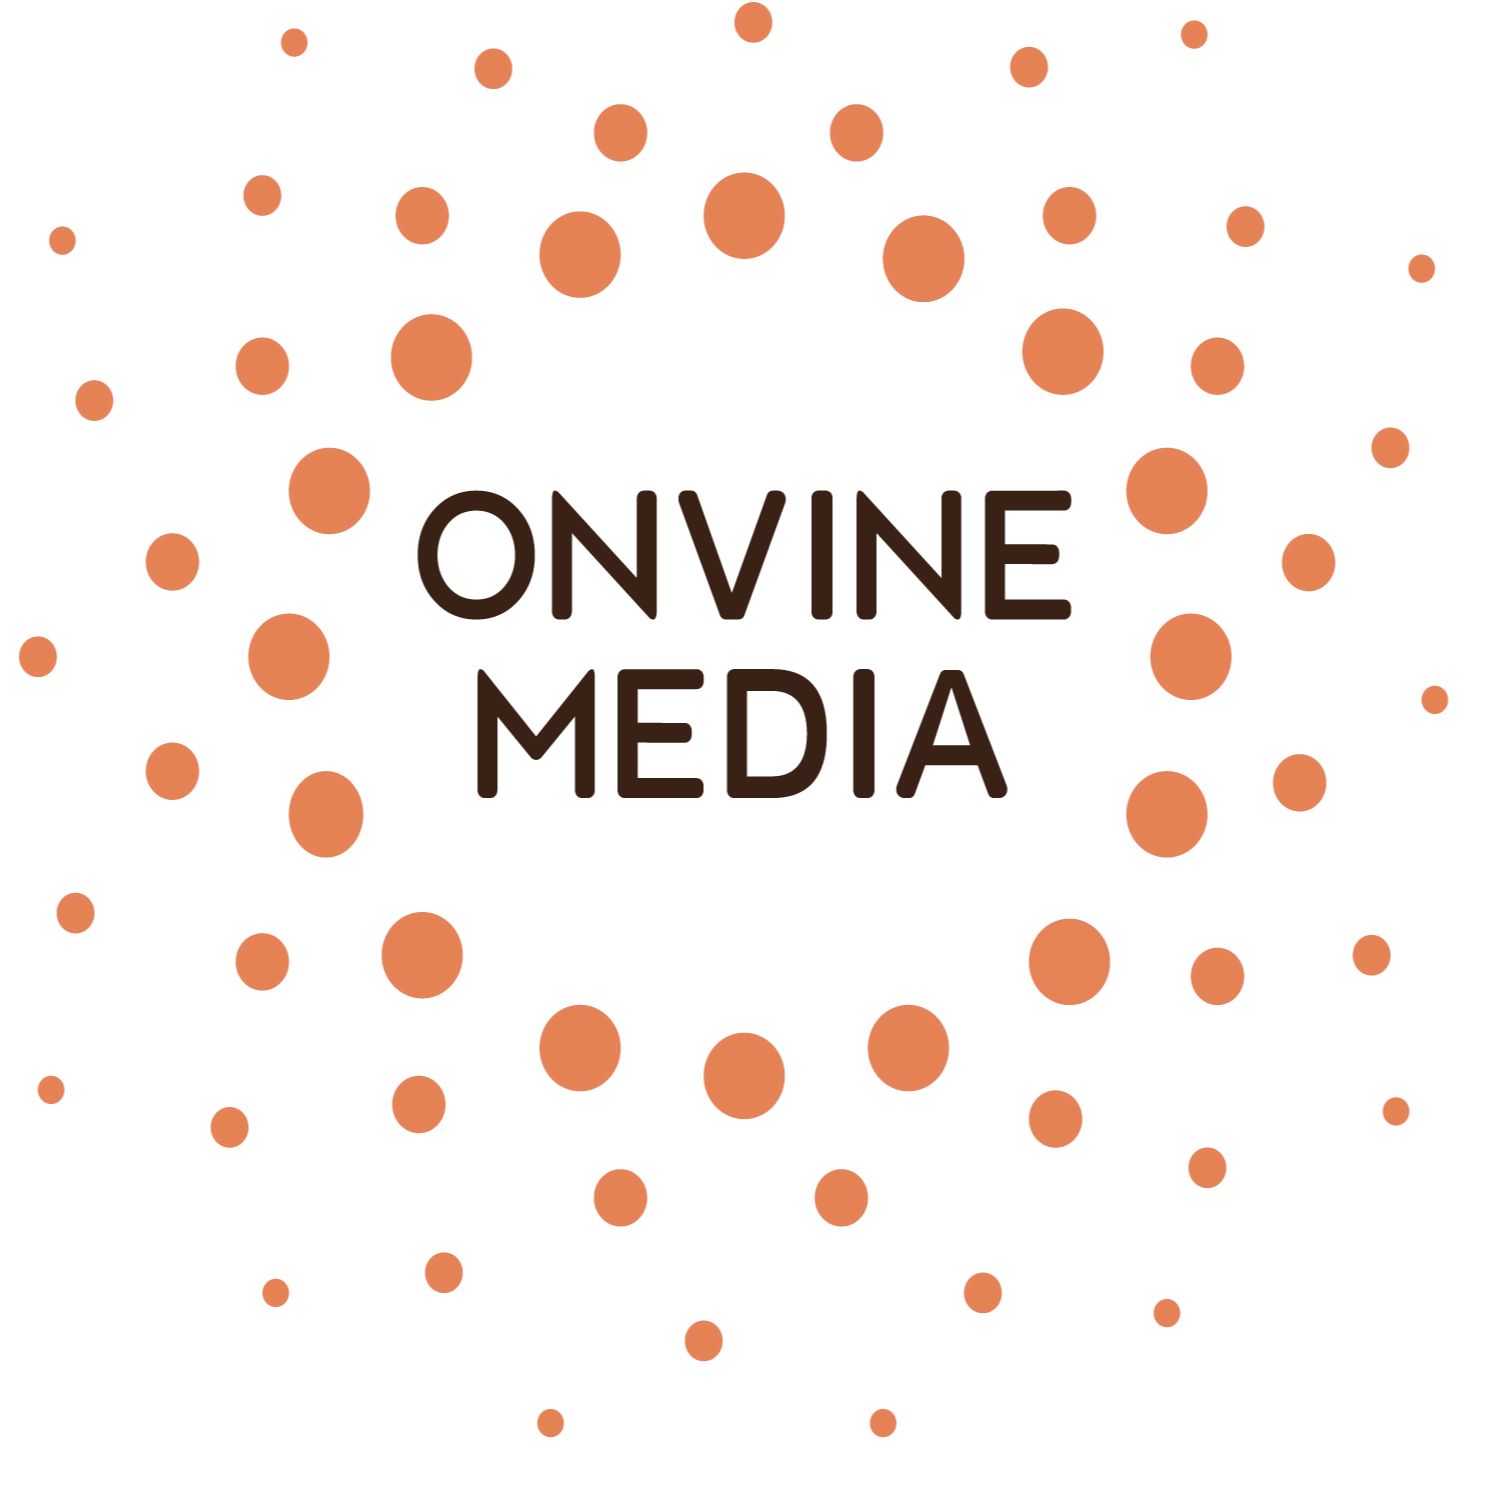 OnVine Media Presents: Things You Need To Know